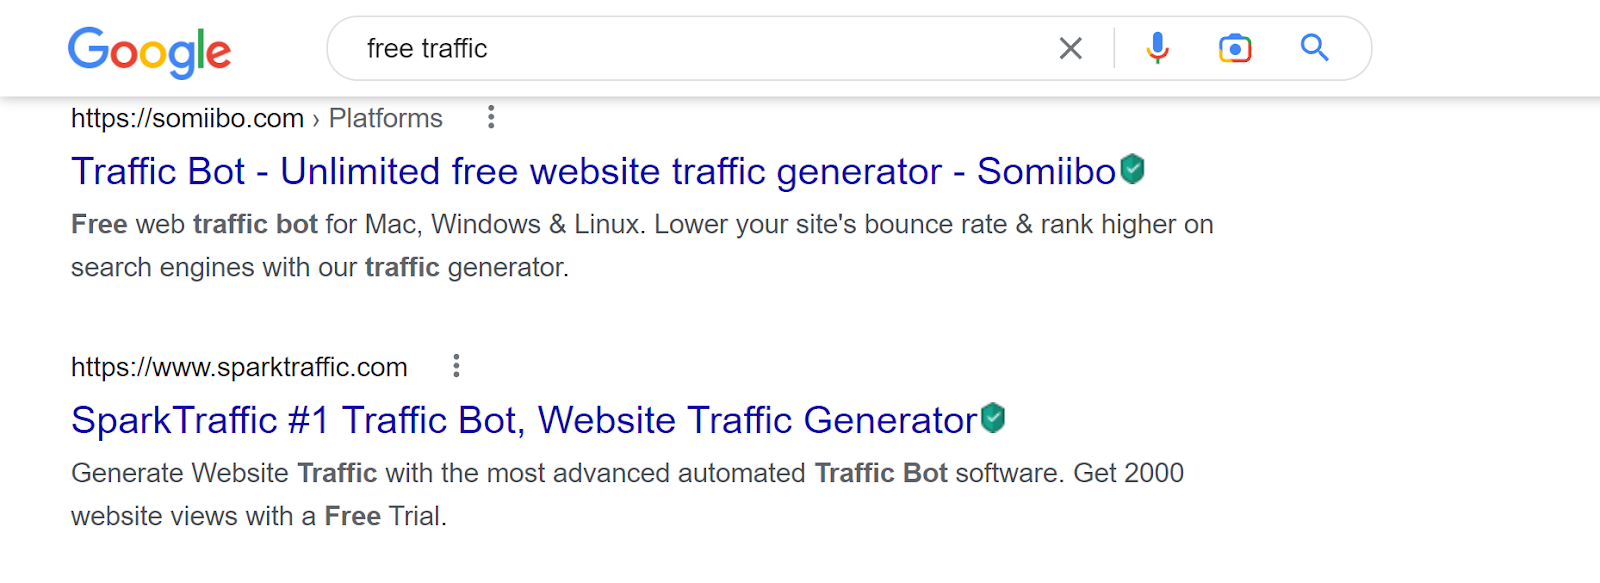 Example of free traffic offers